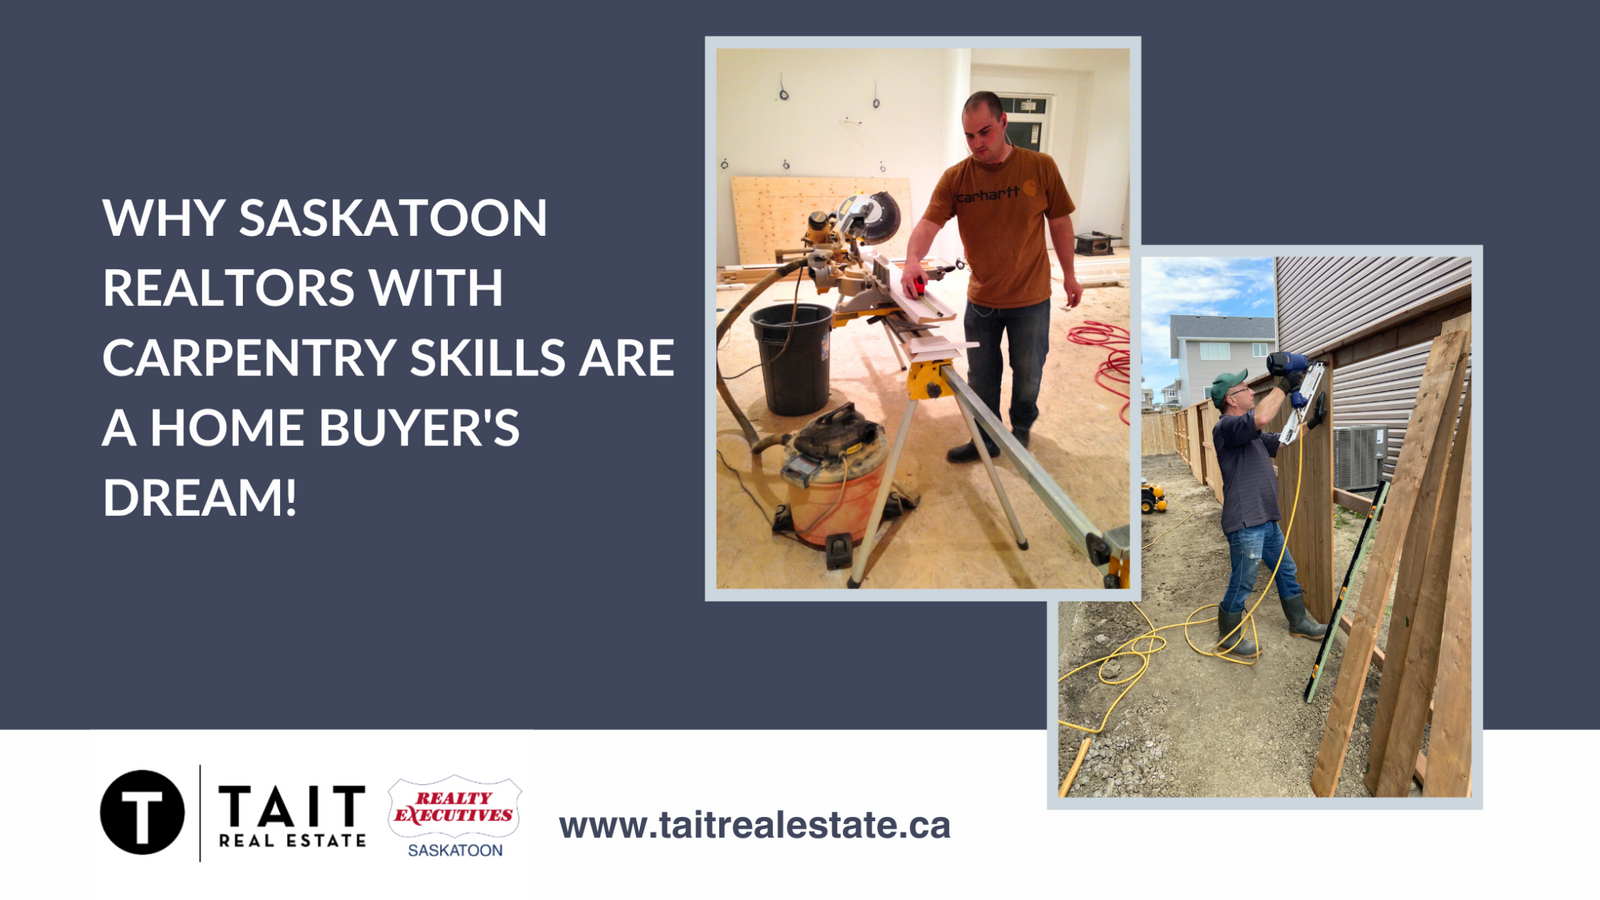 Why Saskatoon Realtors with Carpentry Skills Are a Home Buyer's Dream!